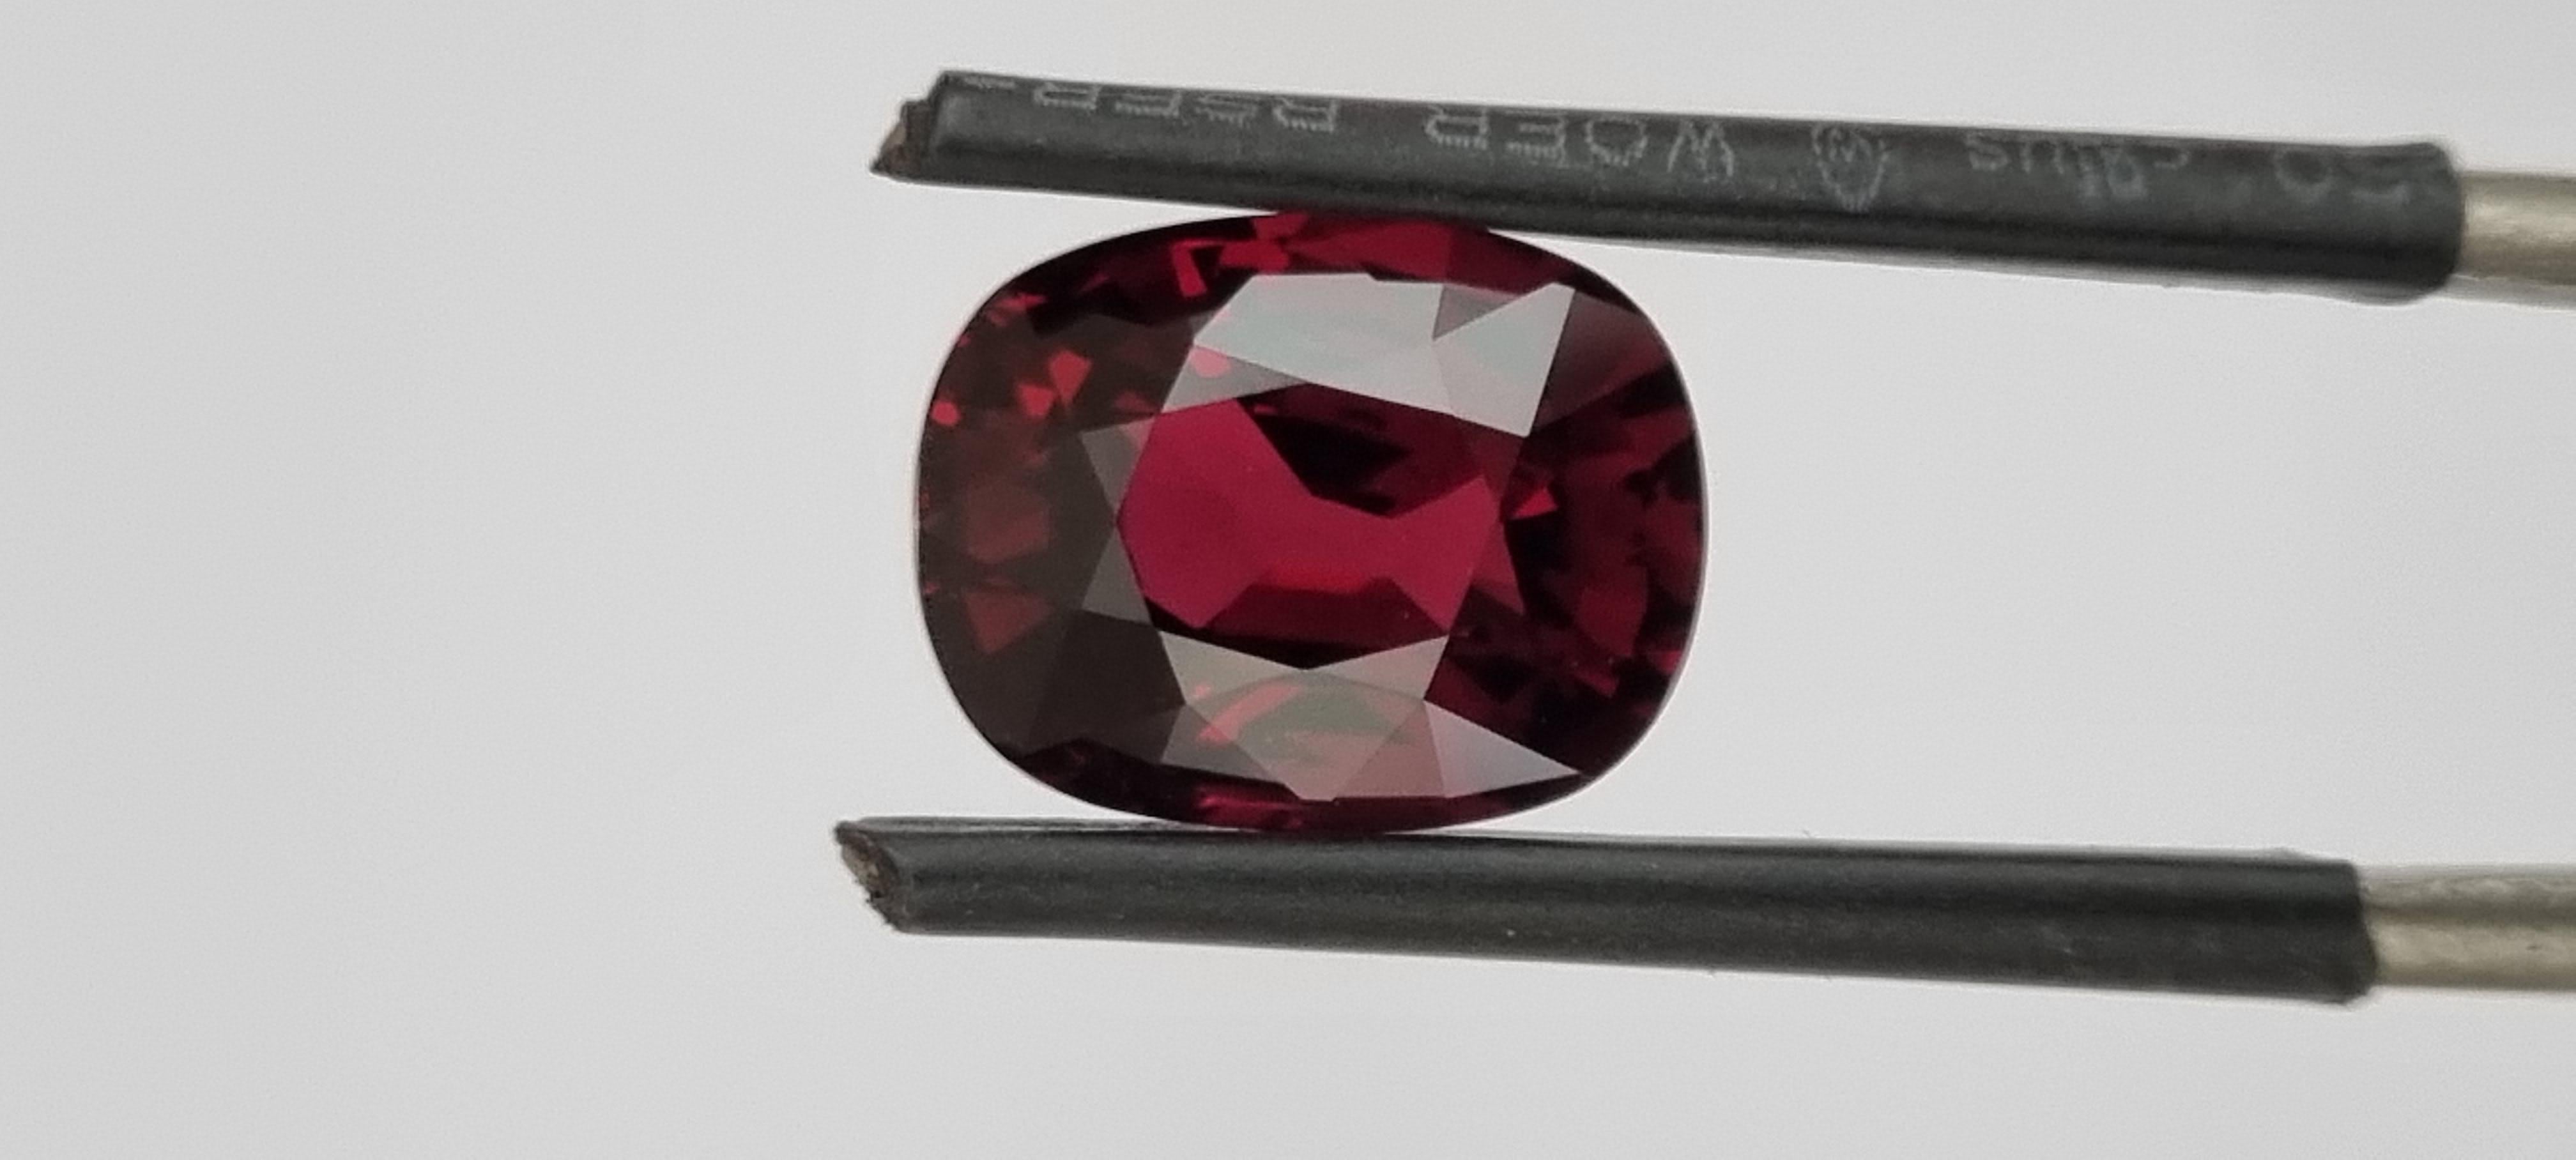 A stunning 5 carat unheated pigeon blood ruby. 

This gorgeous ruby from Mozambique is full of charm and luster. 

Cut in a traditional modern rectangular cushion style, and exhibiting a pure, deep red hue, this gem would be perfect for a Diamond